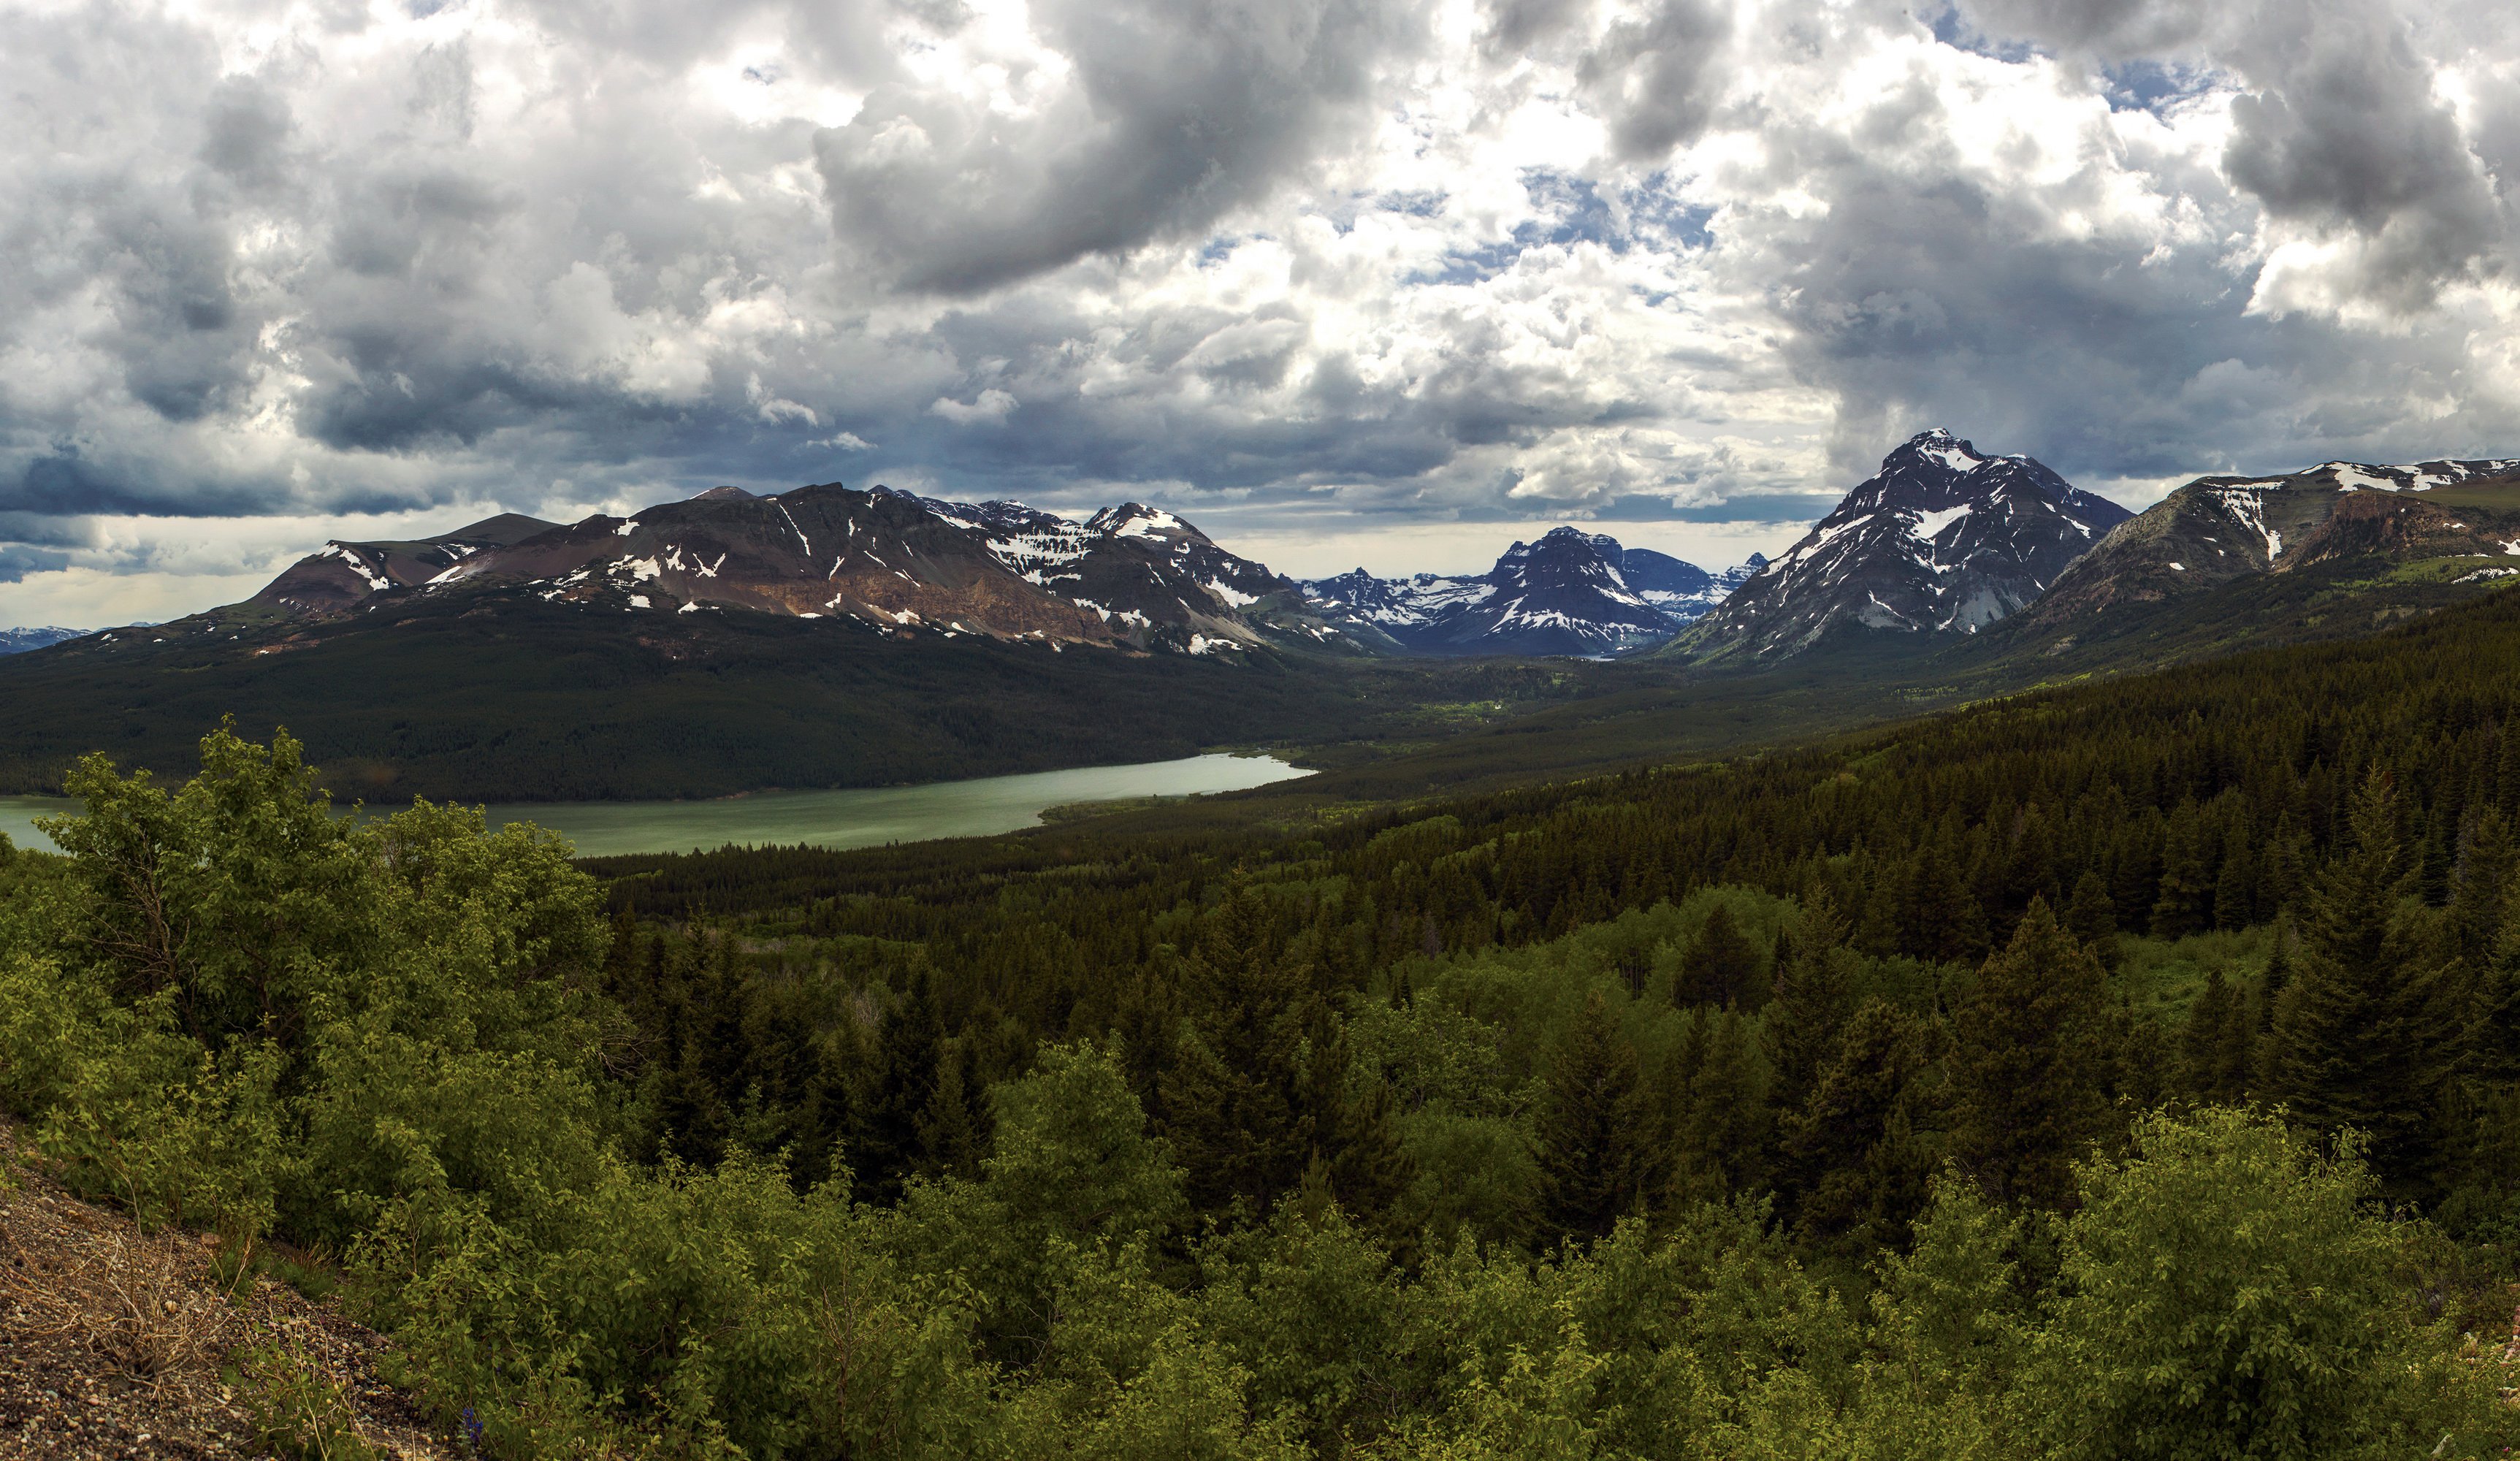 usa, Scenery, Park, Forest, Mountains, Glacier, Montana, Clouds, Nature, Lake Wallpaper